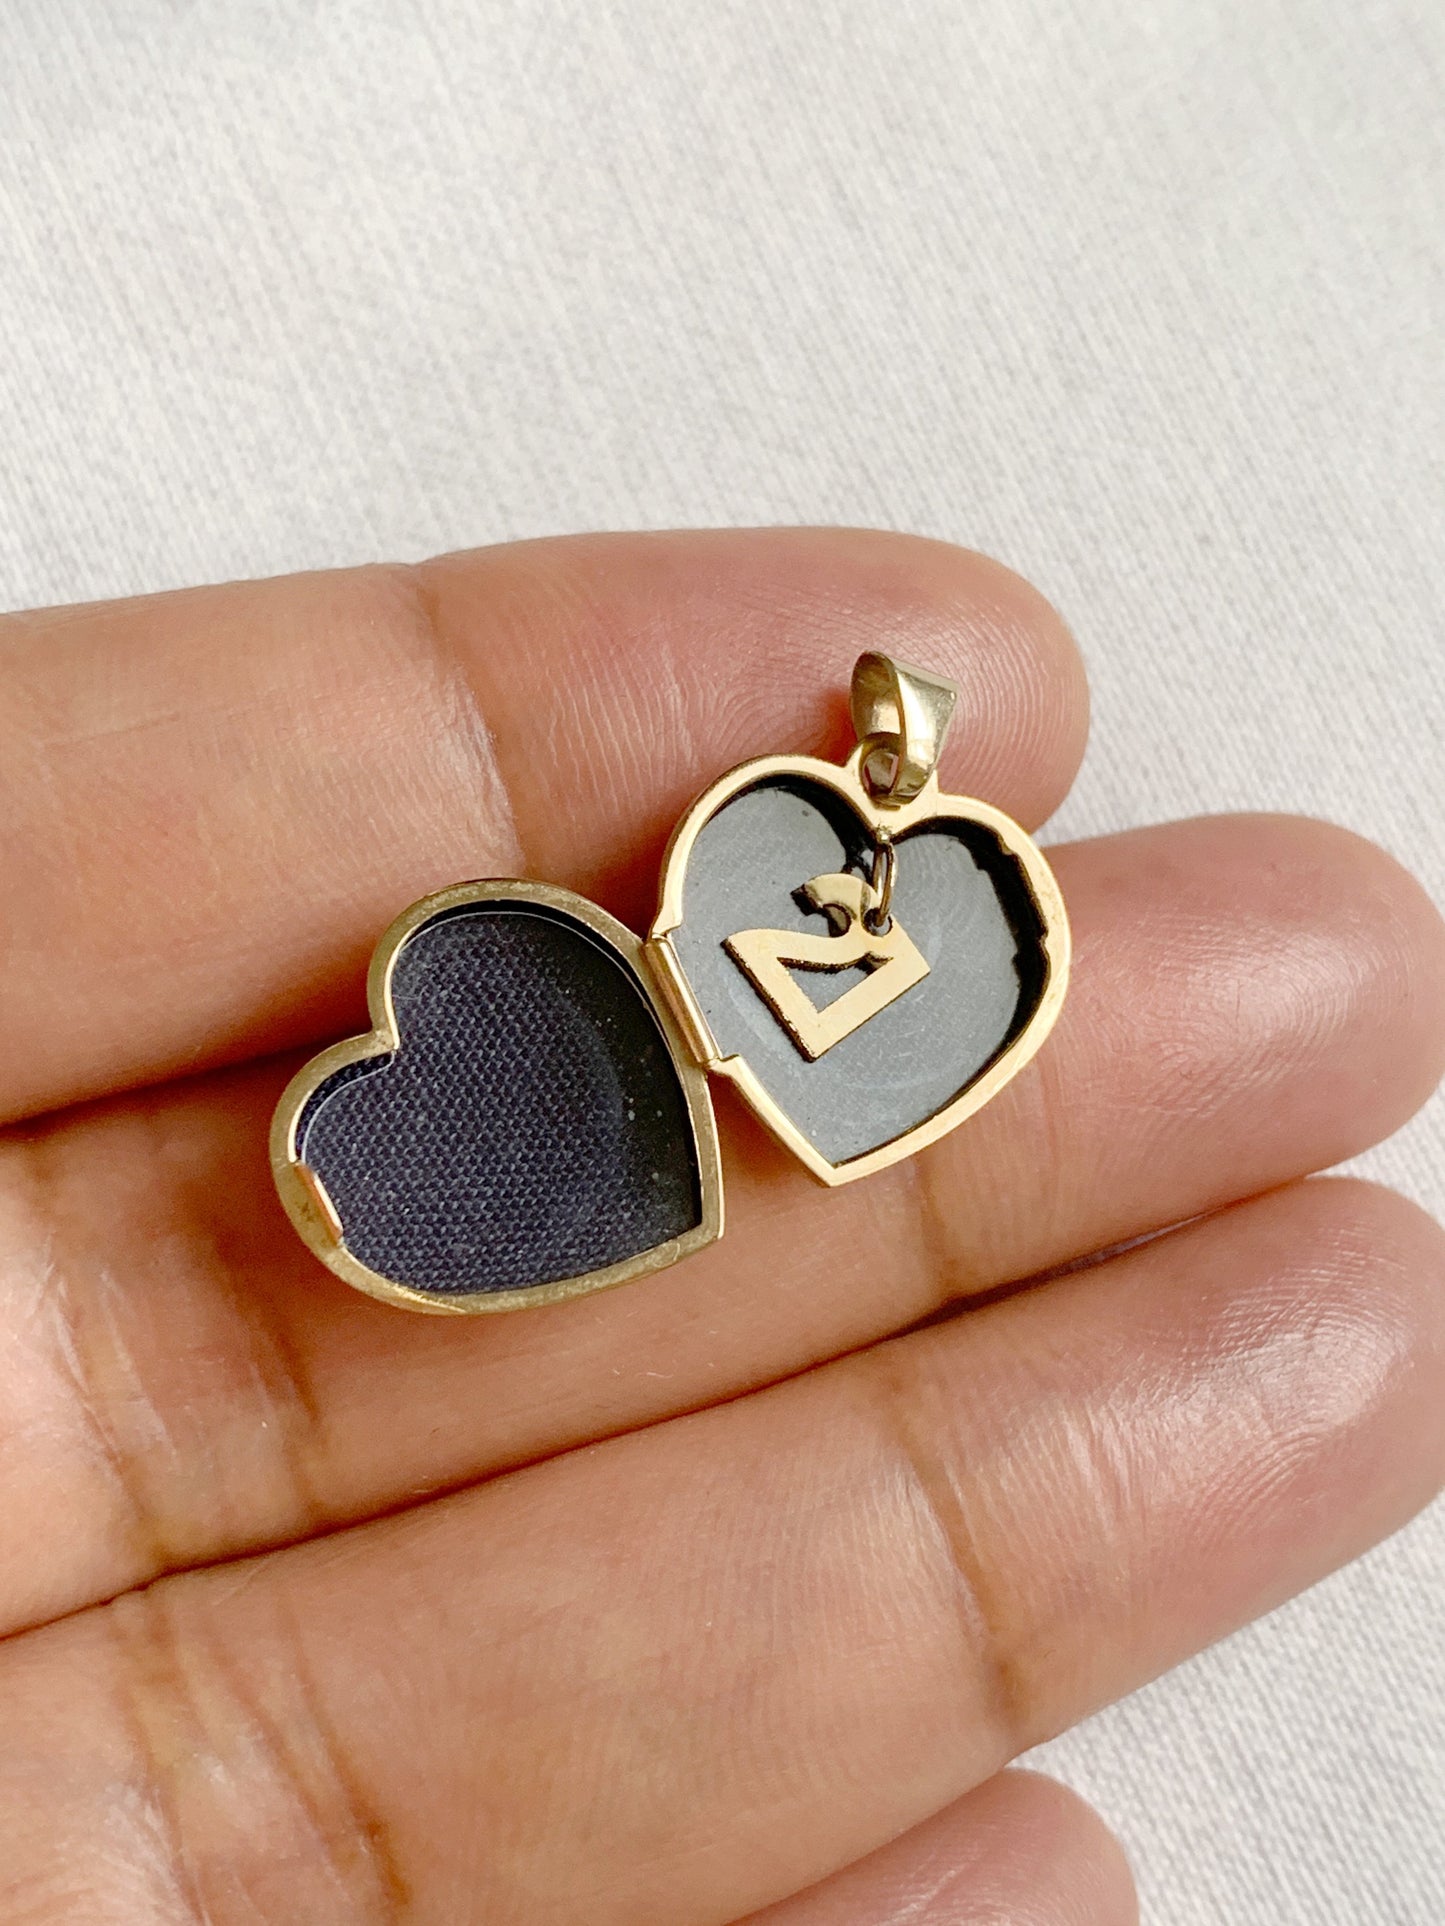 Vintage 9ct Gold Heart Locket with 21 Charm inside